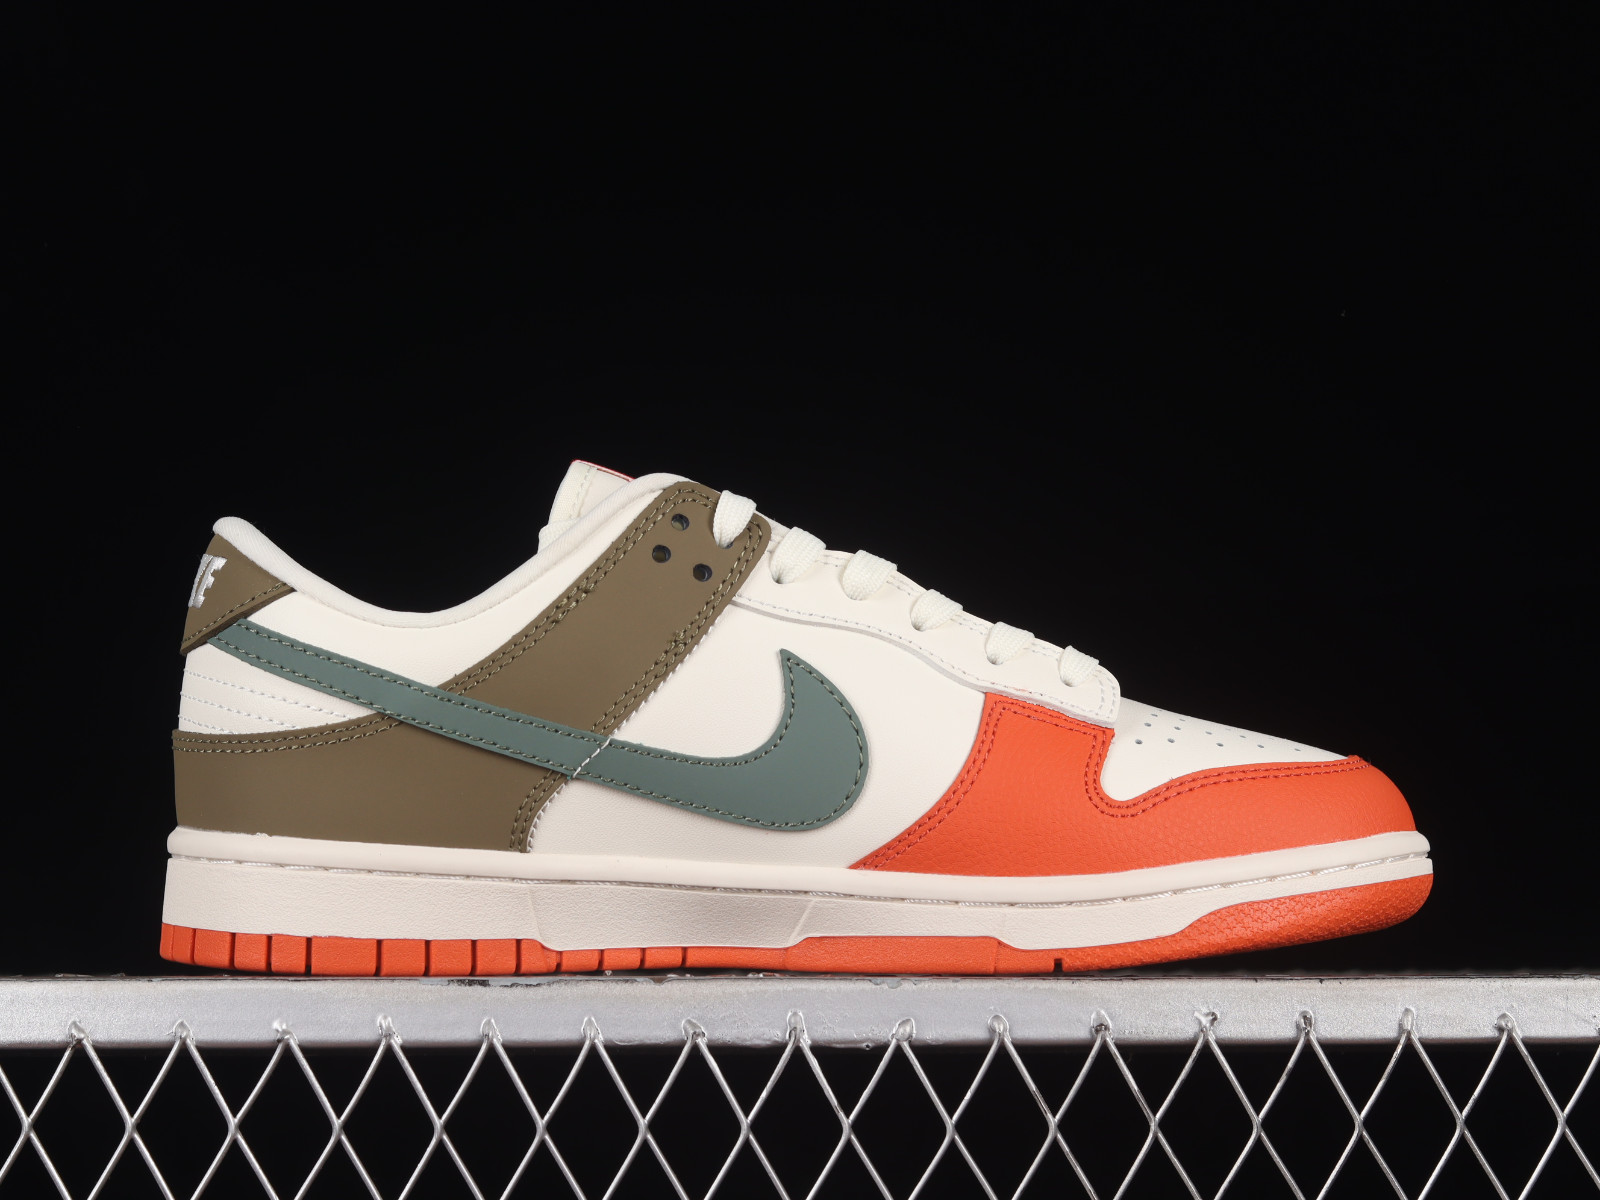 Winst experimenteel lokaal Nike SB Dunk Low GS Beige Orange Green FC1688 - 500 -  MultiscaleconsultingShops - fashion nike air vapormax 360 metallic gold  running shoes